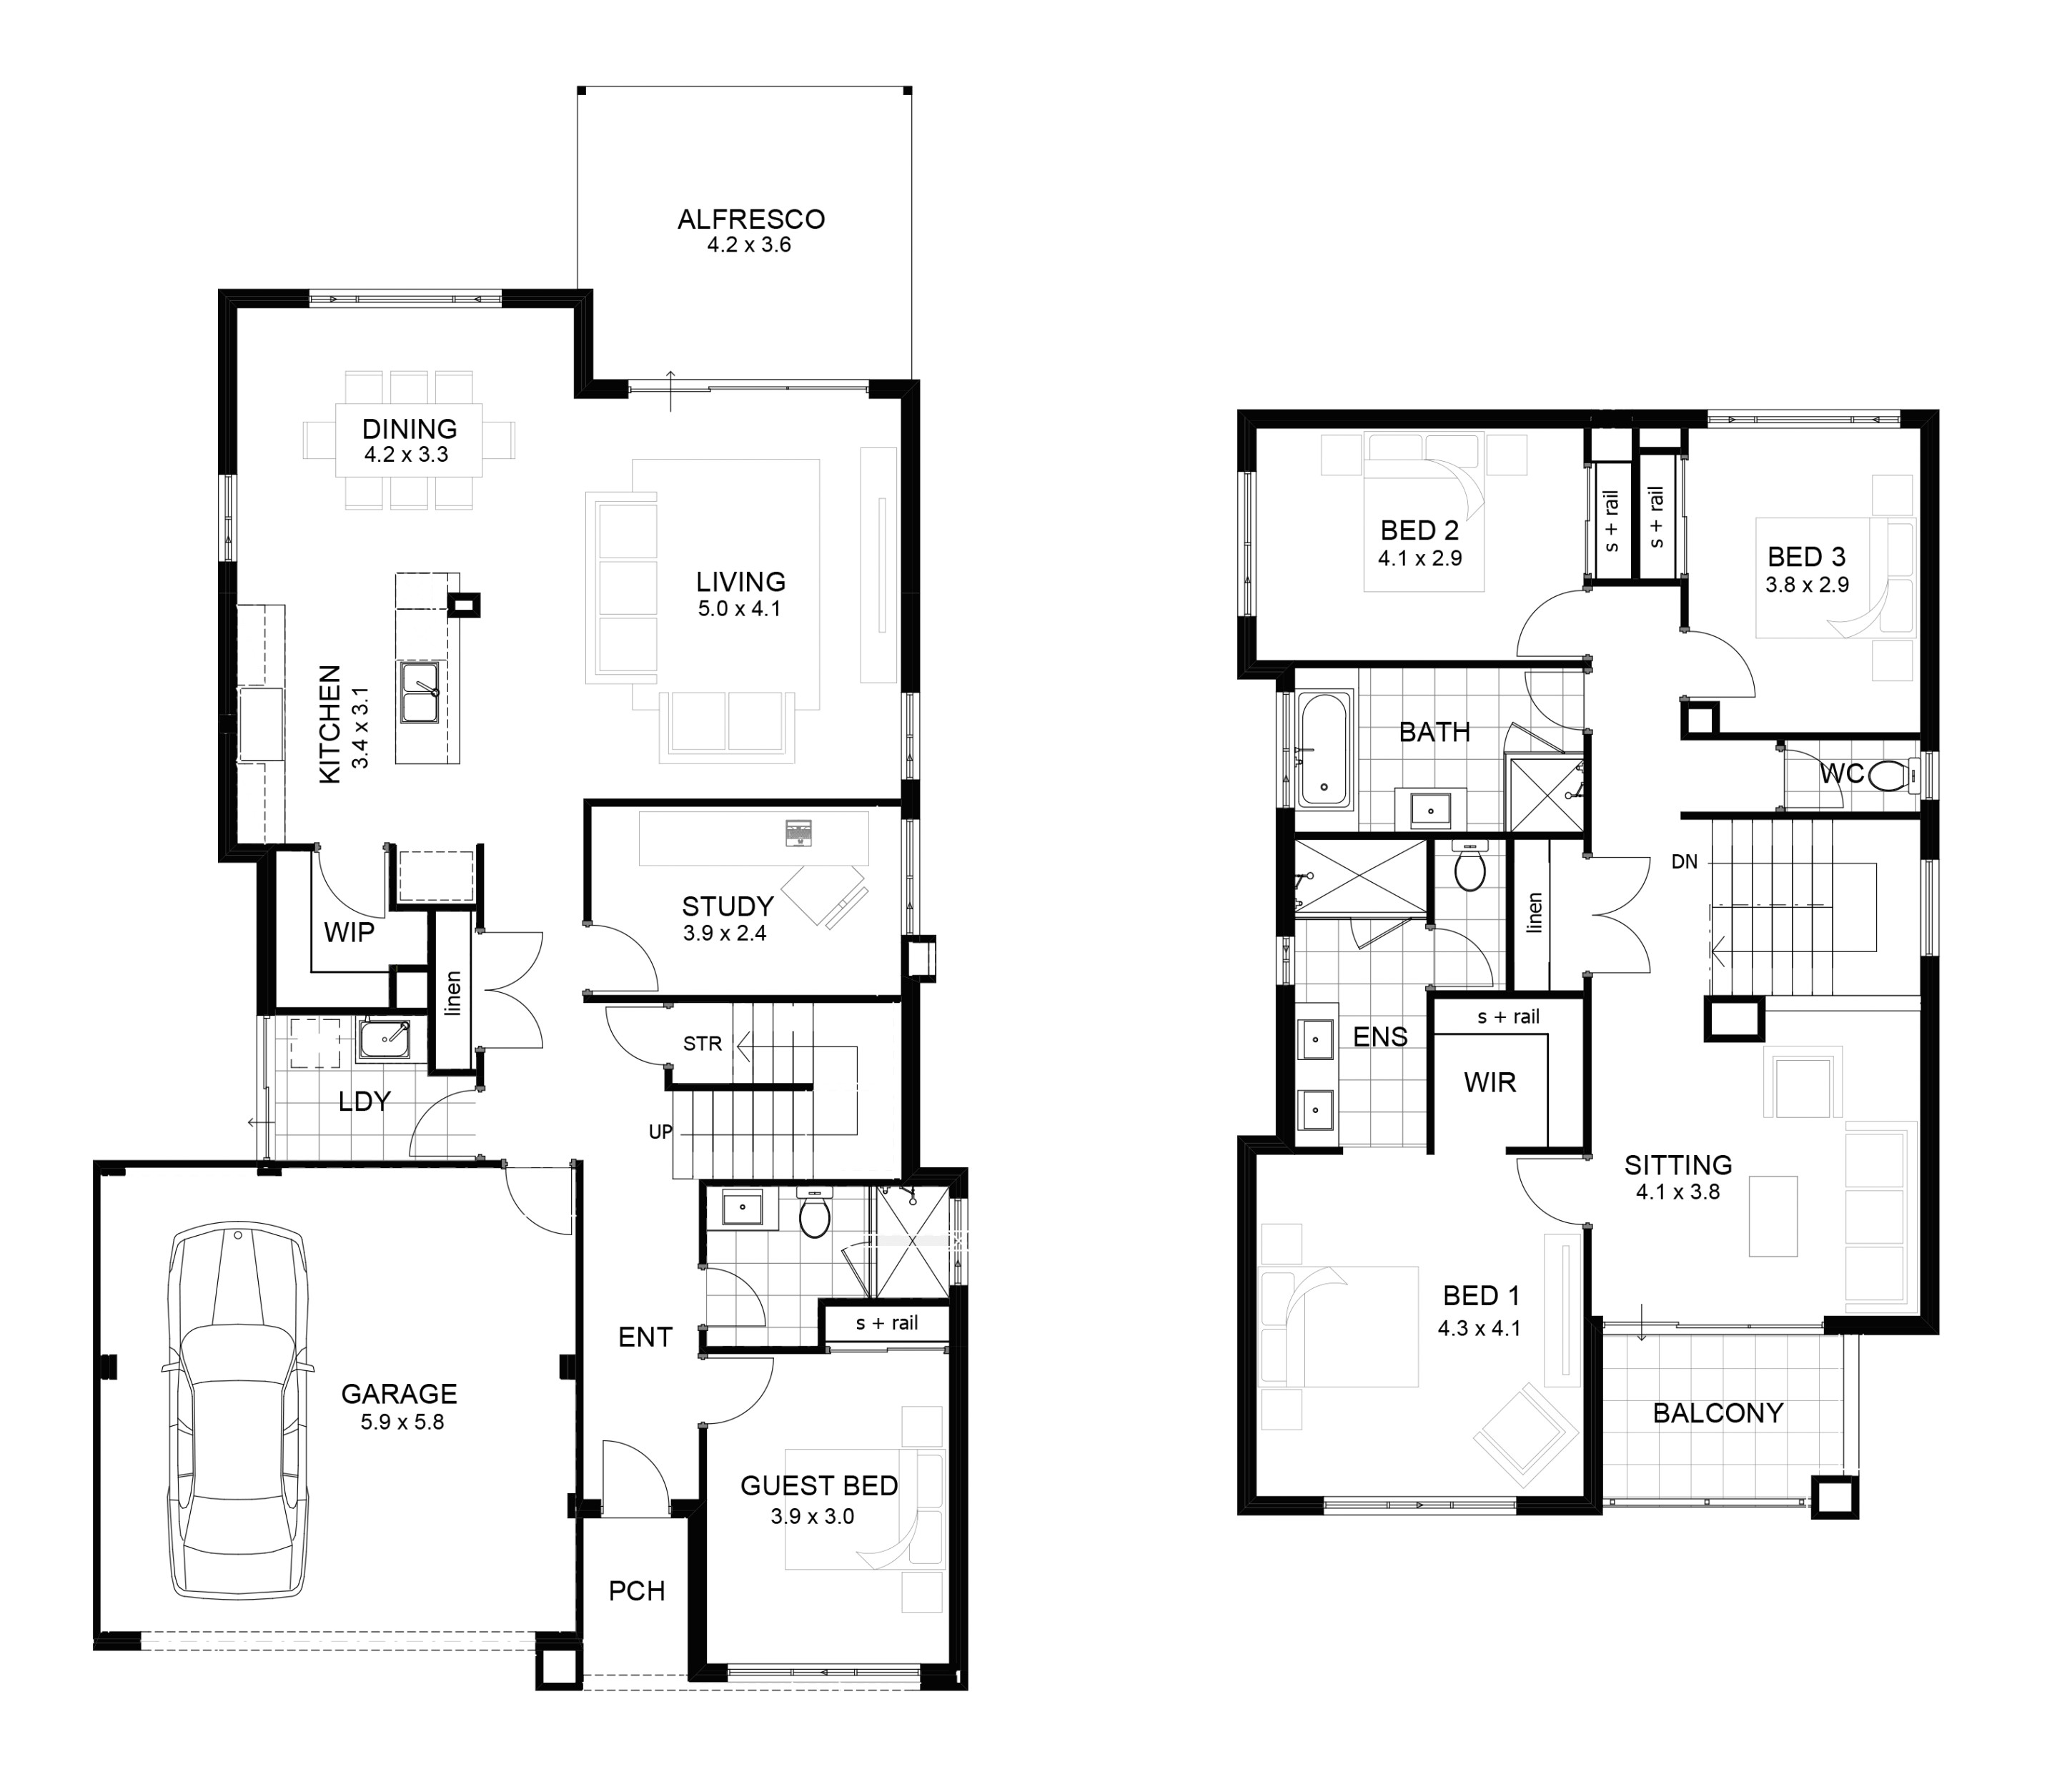 luxury home plans 7 bedroomscolonial story house plans small two with sample floor plans 2 story home